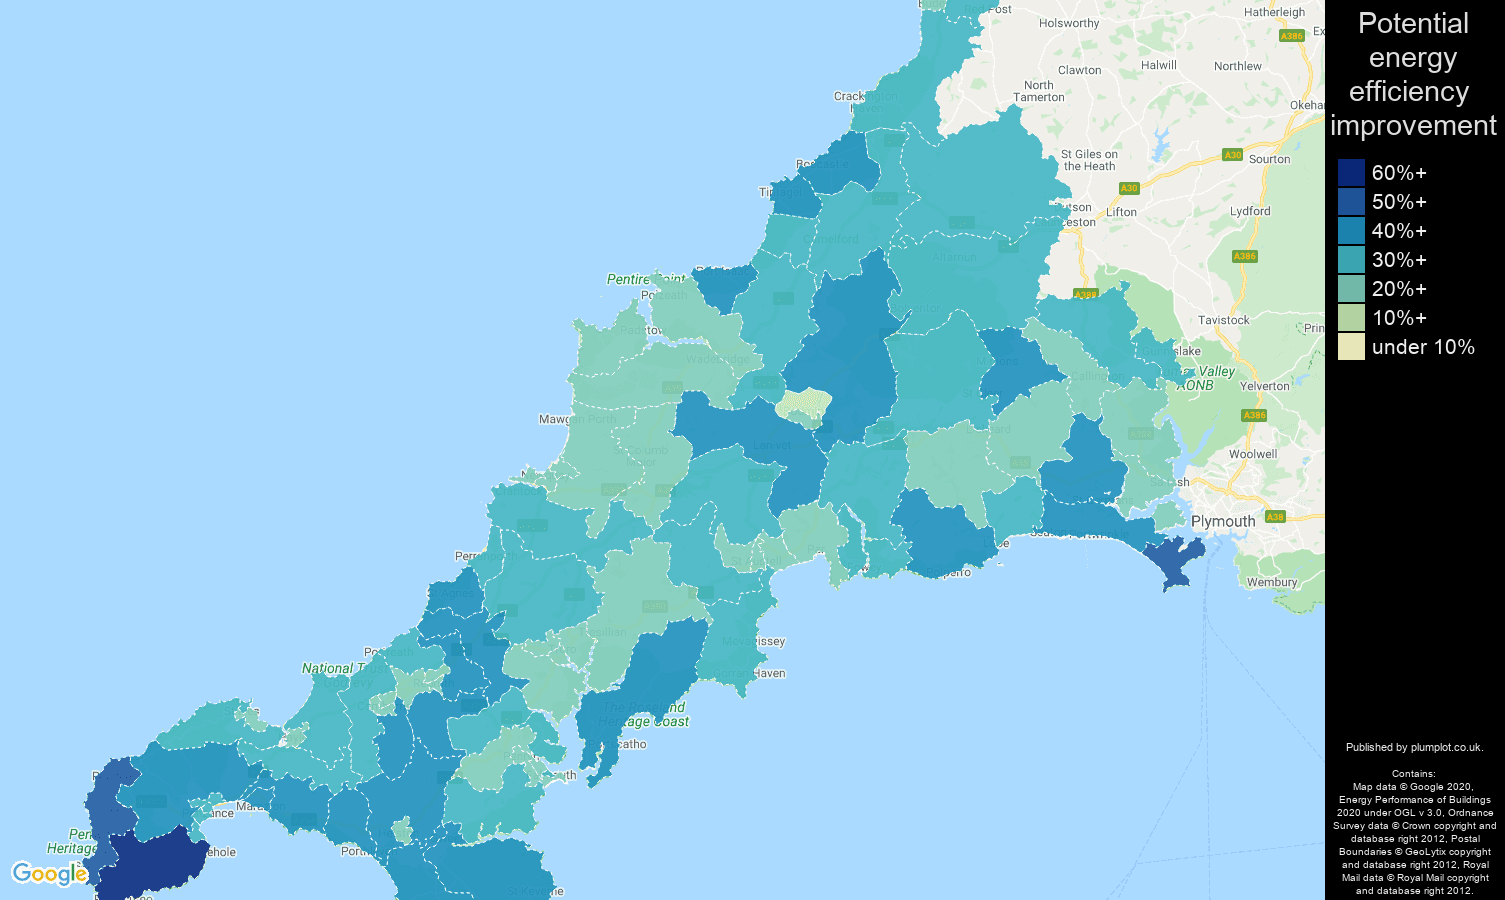 Cornwall map of potential energy efficiency improvement of houses